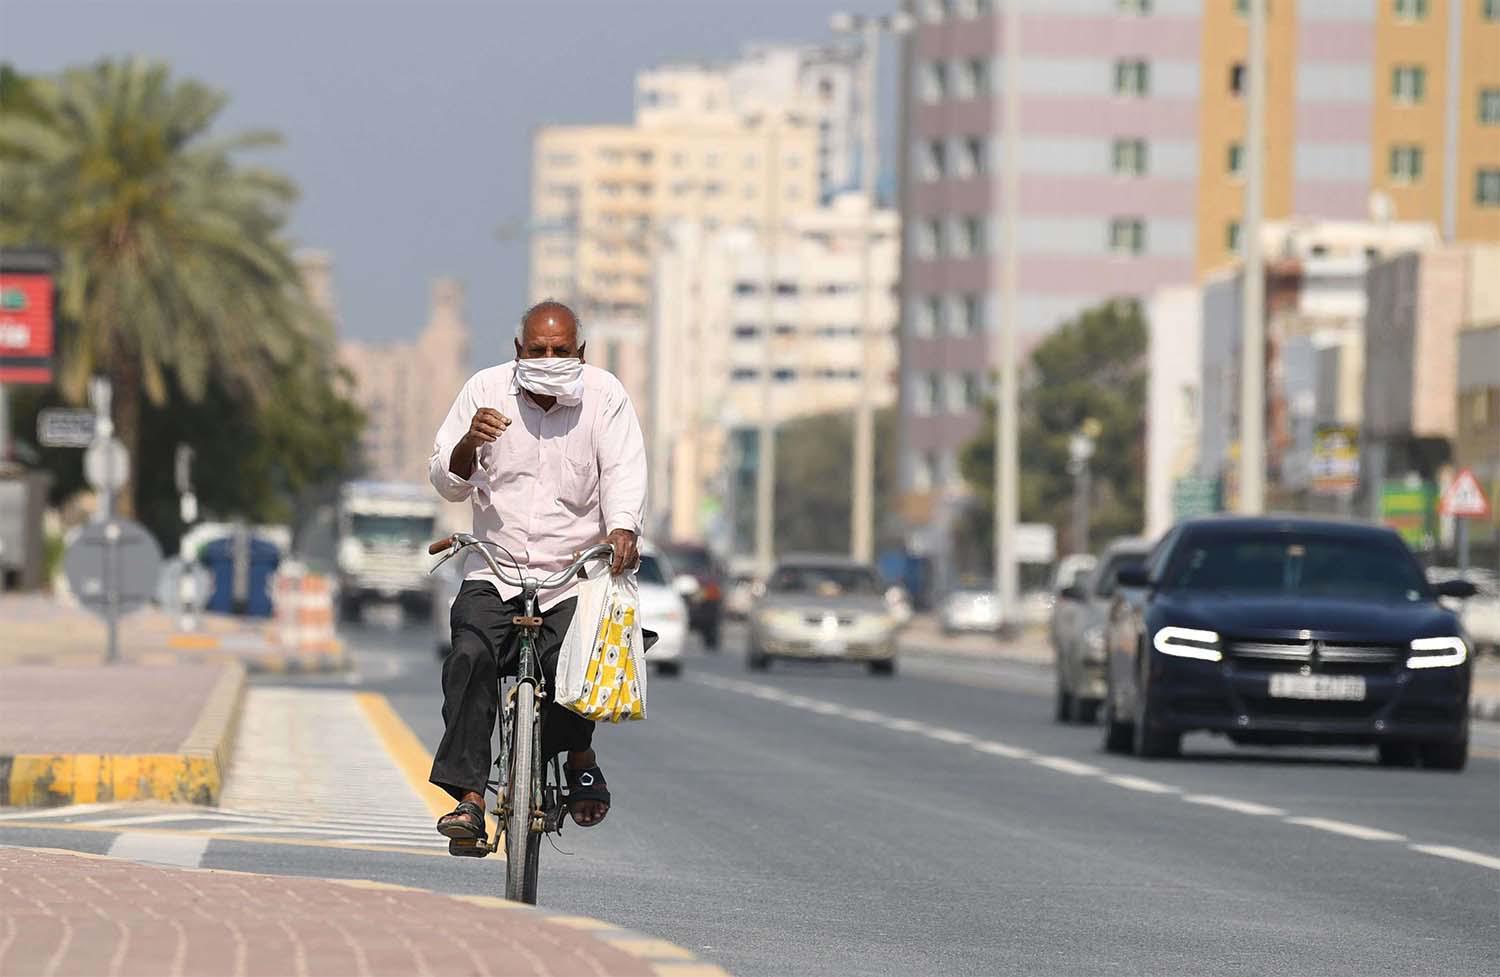 A worker wearing a protective mask bikes on a street in Sharjah